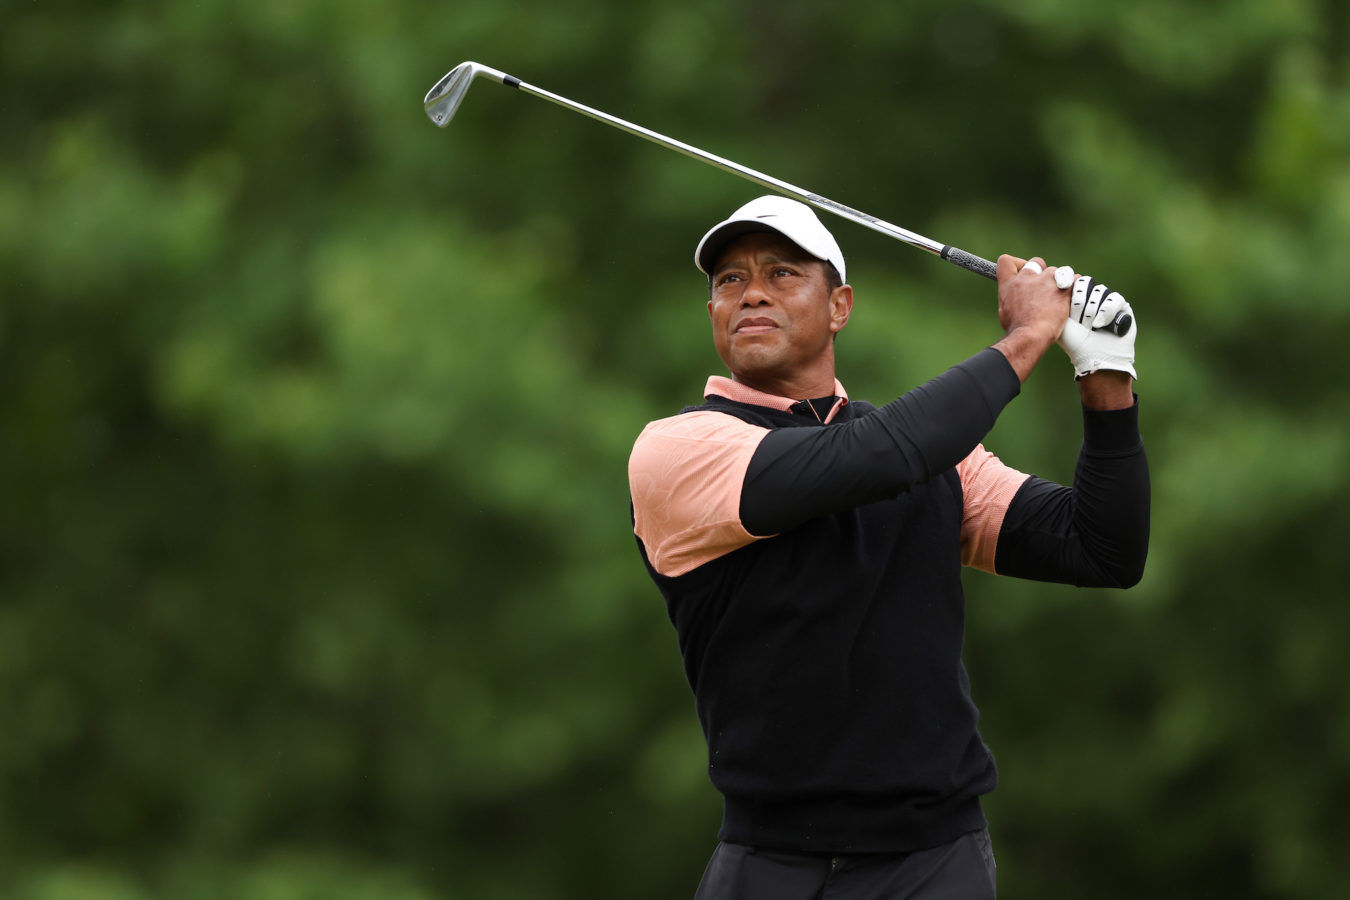 Tiger Woods is now the third billionaire athlete